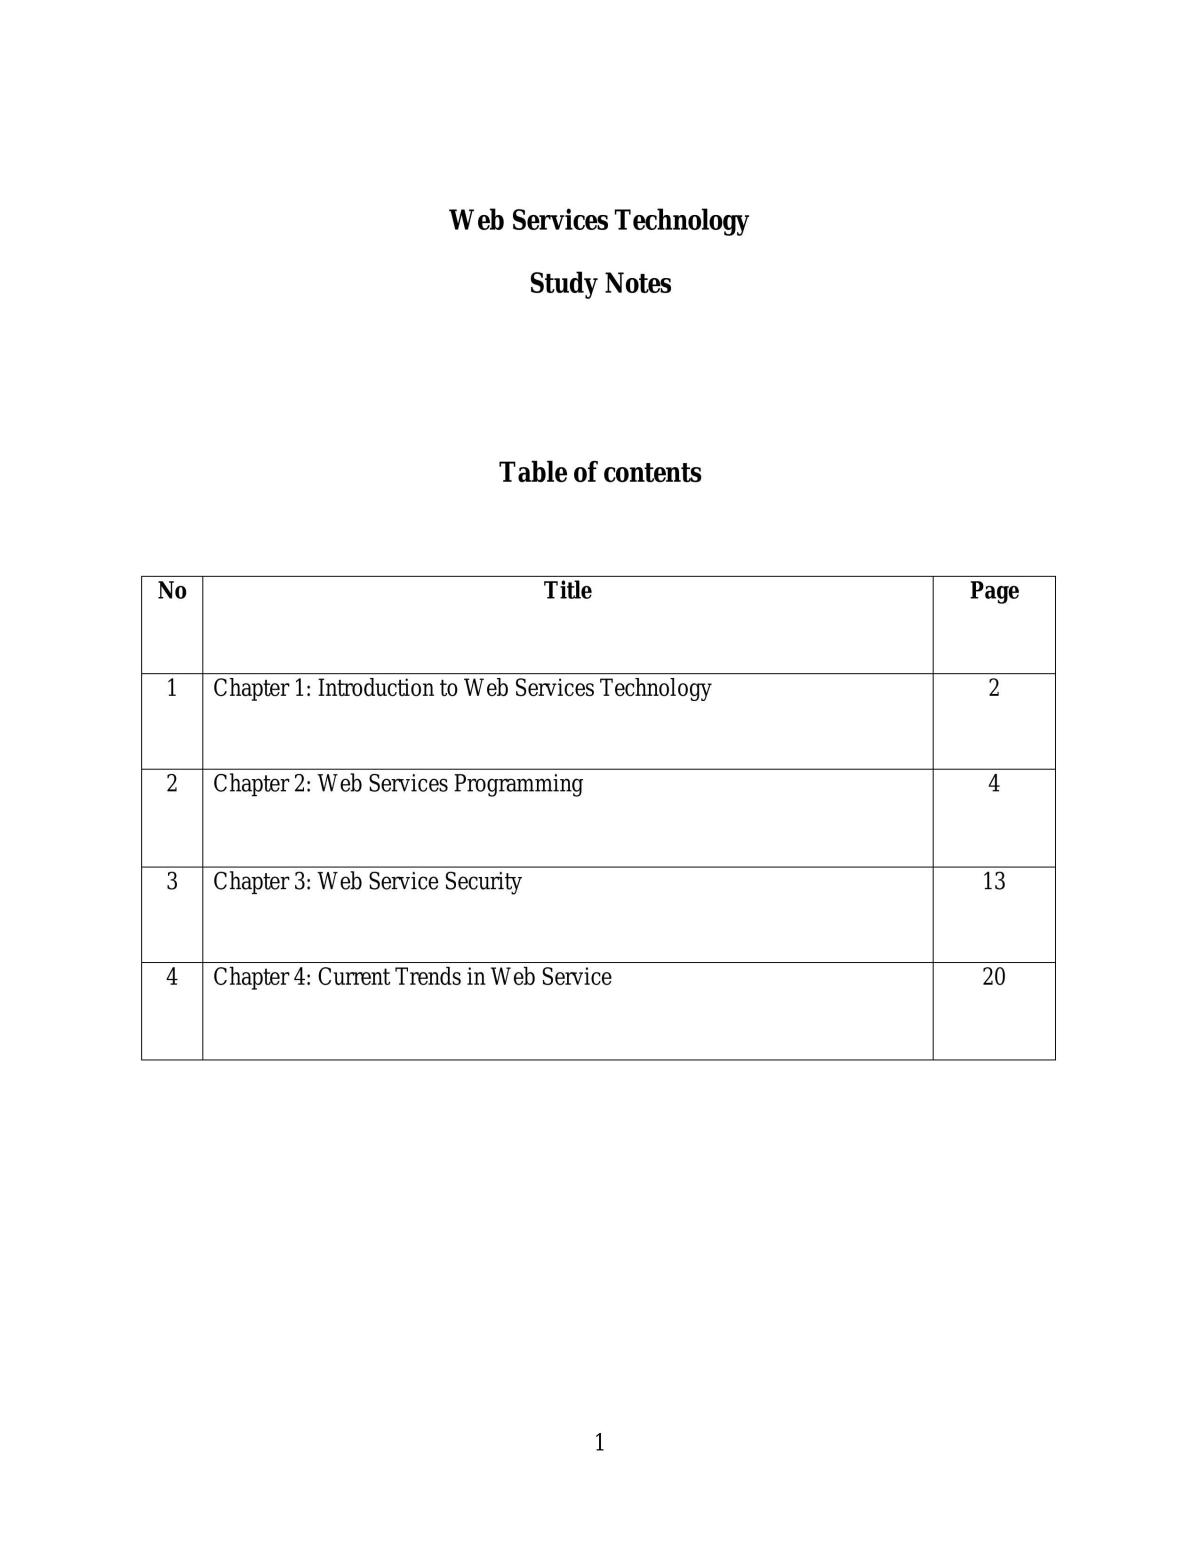 Web Services Technology - Page 1